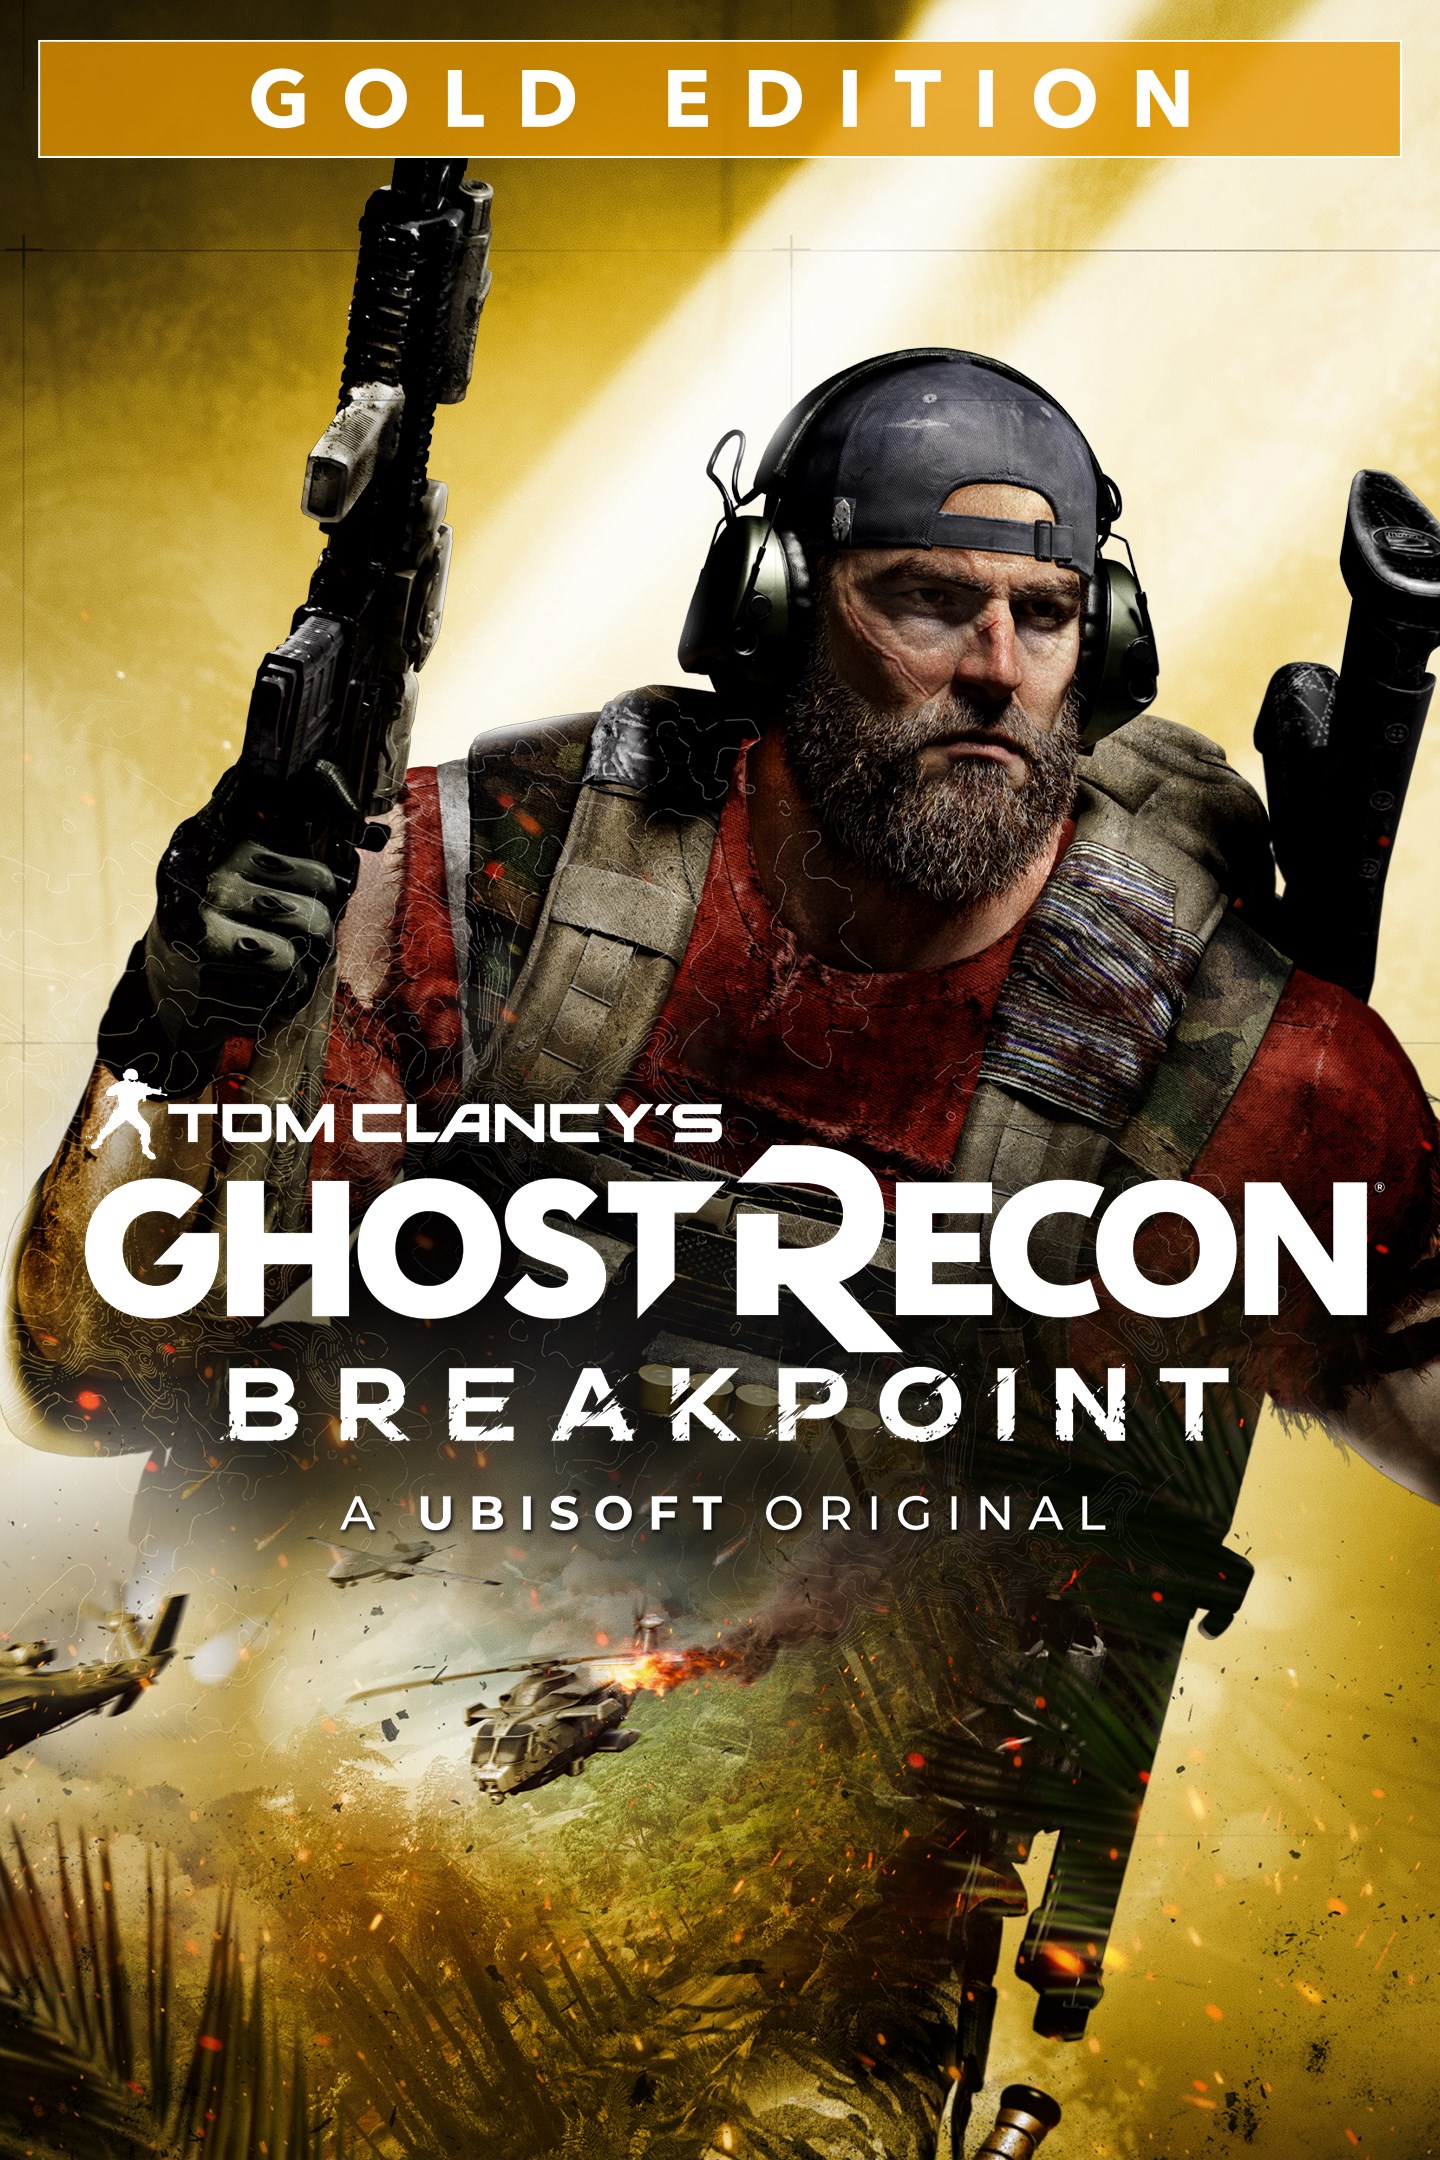 Tom Clancy’s Ghost Recon Breakpoint - Gold Edition 包裝圖